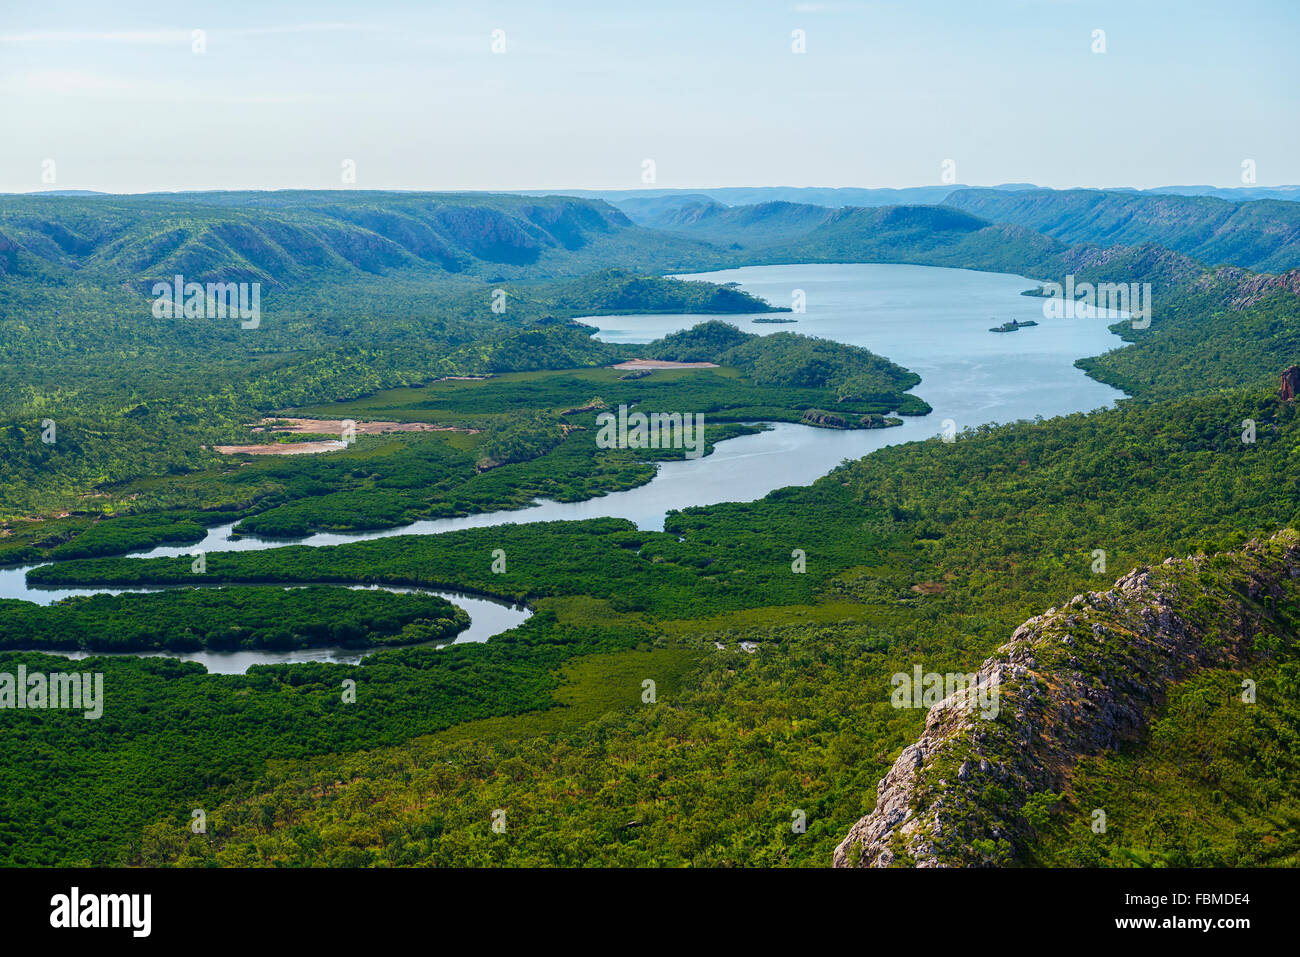 Aerial view of a lake and escarpments in the Kimberley region,  Australia Stock Photo